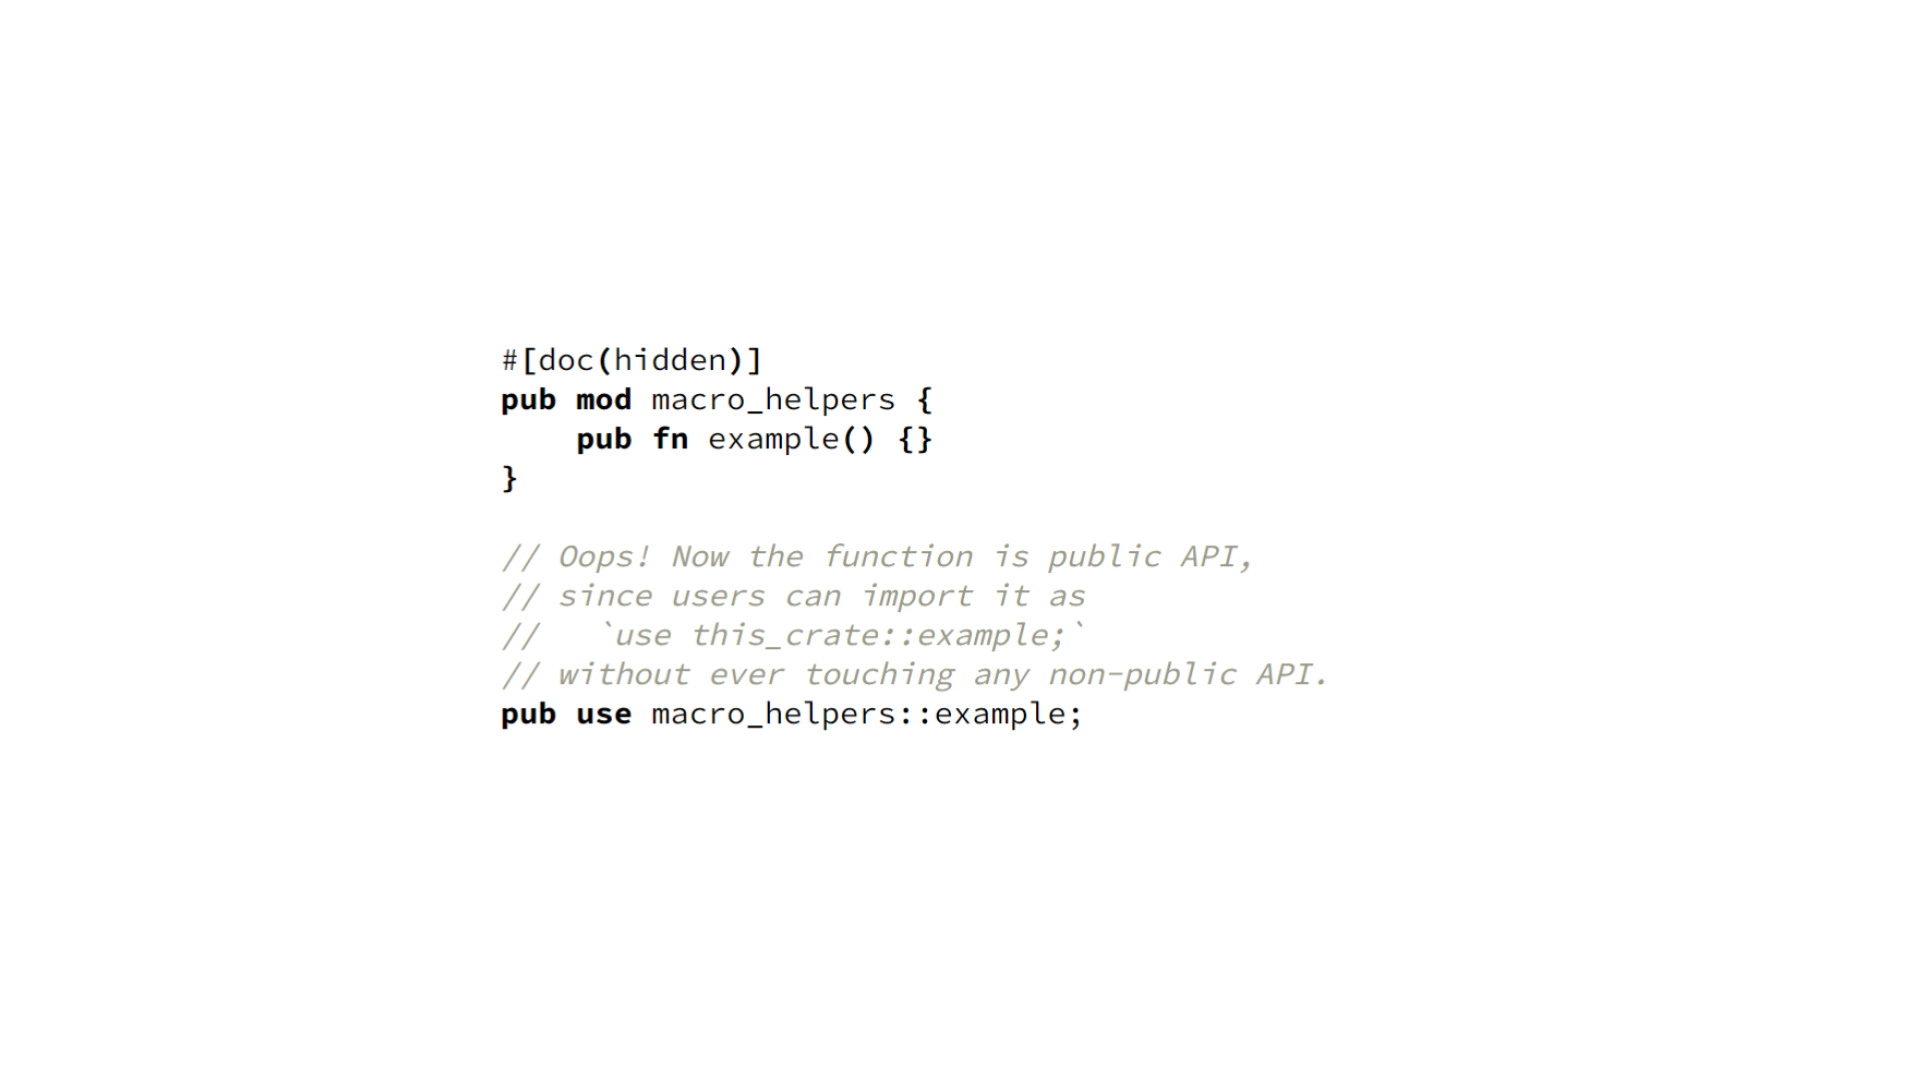 Another block of code. It shows a public module marked `#[doc(hidden)]` containing a public function. A line of code adjacent to the module performs a re-export (`pub use`) of the public function, making it possible for other crates to import the function without touching any non-public APIs. Neither the function nor its re-export are themselves `#[doc(hidden)]`, so this function is public API under the path `this_crate::example`. Its deletion would be a major breaking change.